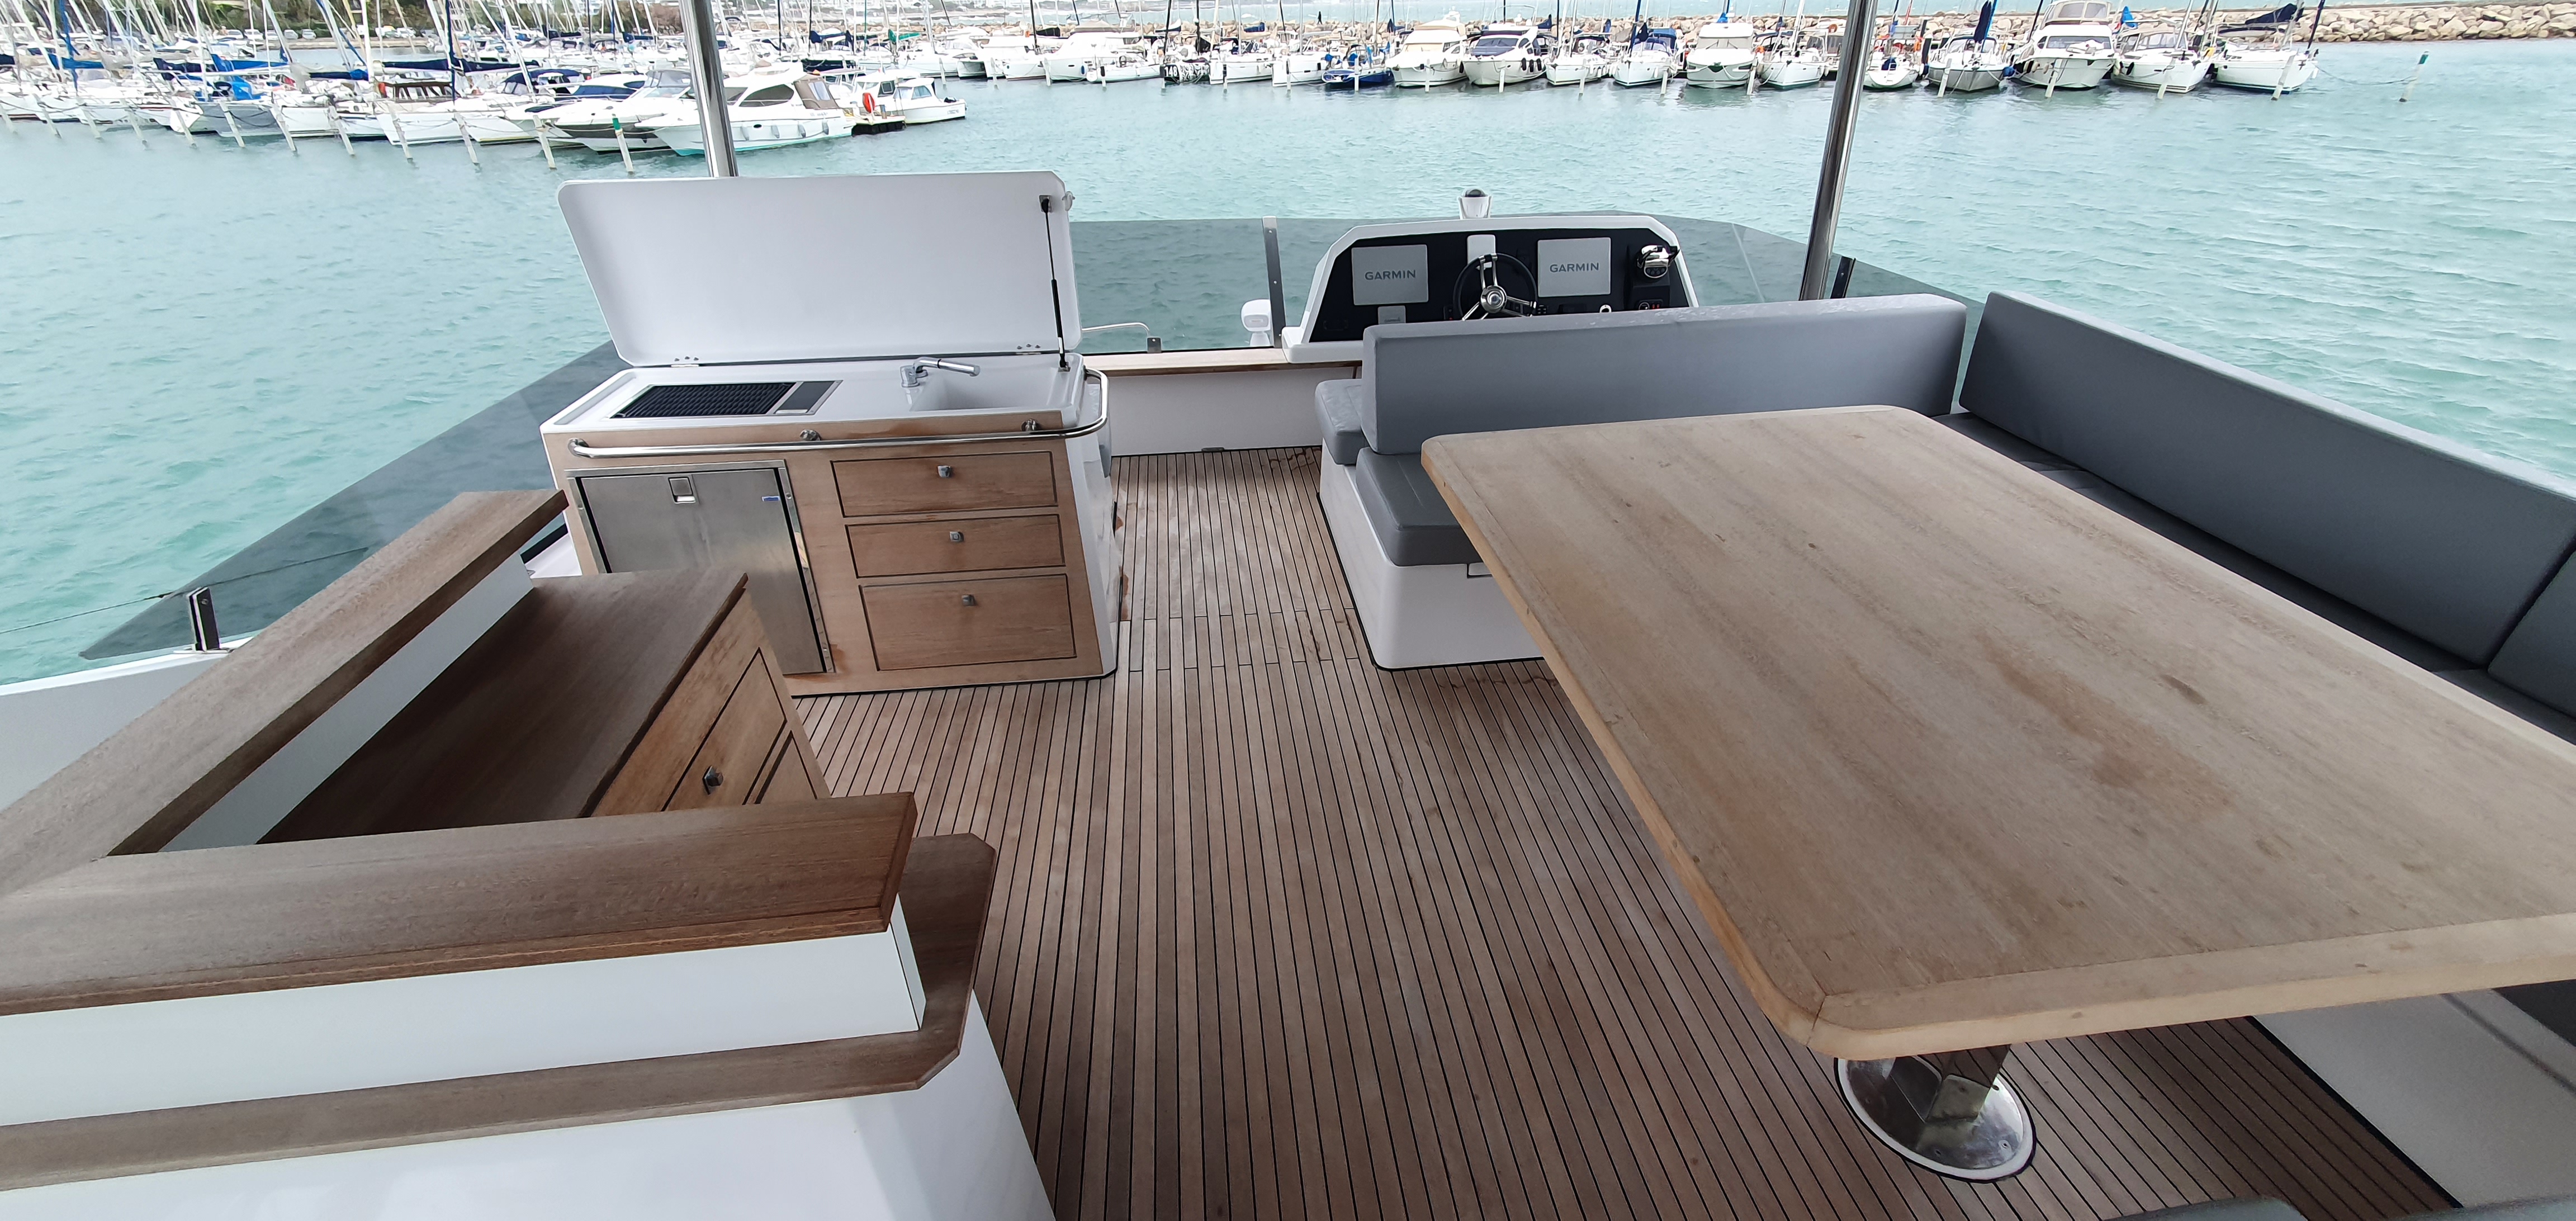 Aventura 50 MY - Yacht Charter French Riviera & Boat hire in France French Riviera Hyeres Hyeres 4